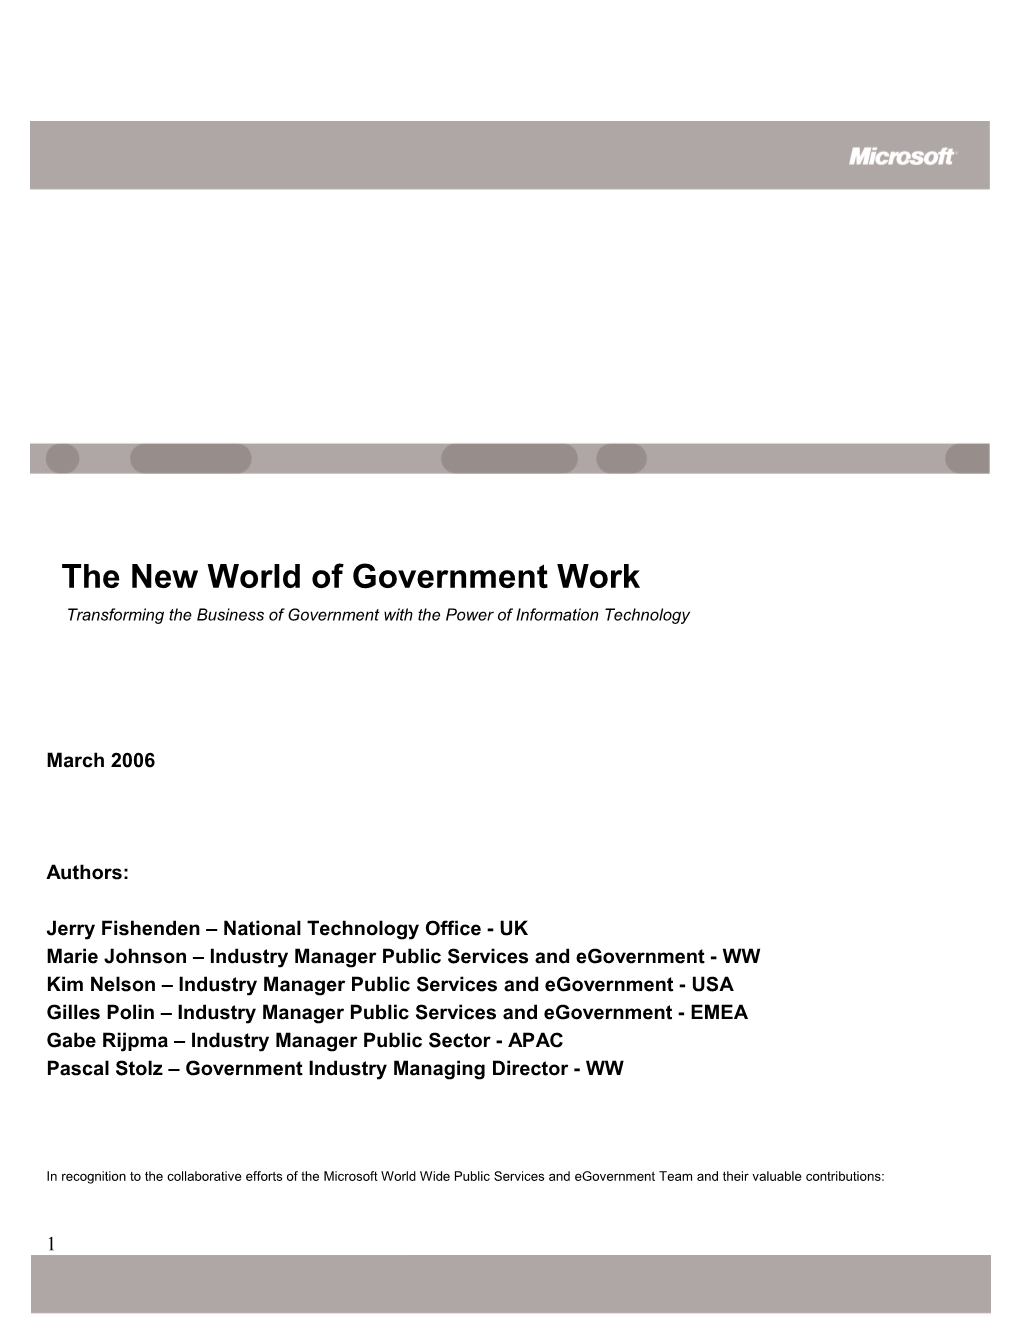 The New World of Government Work